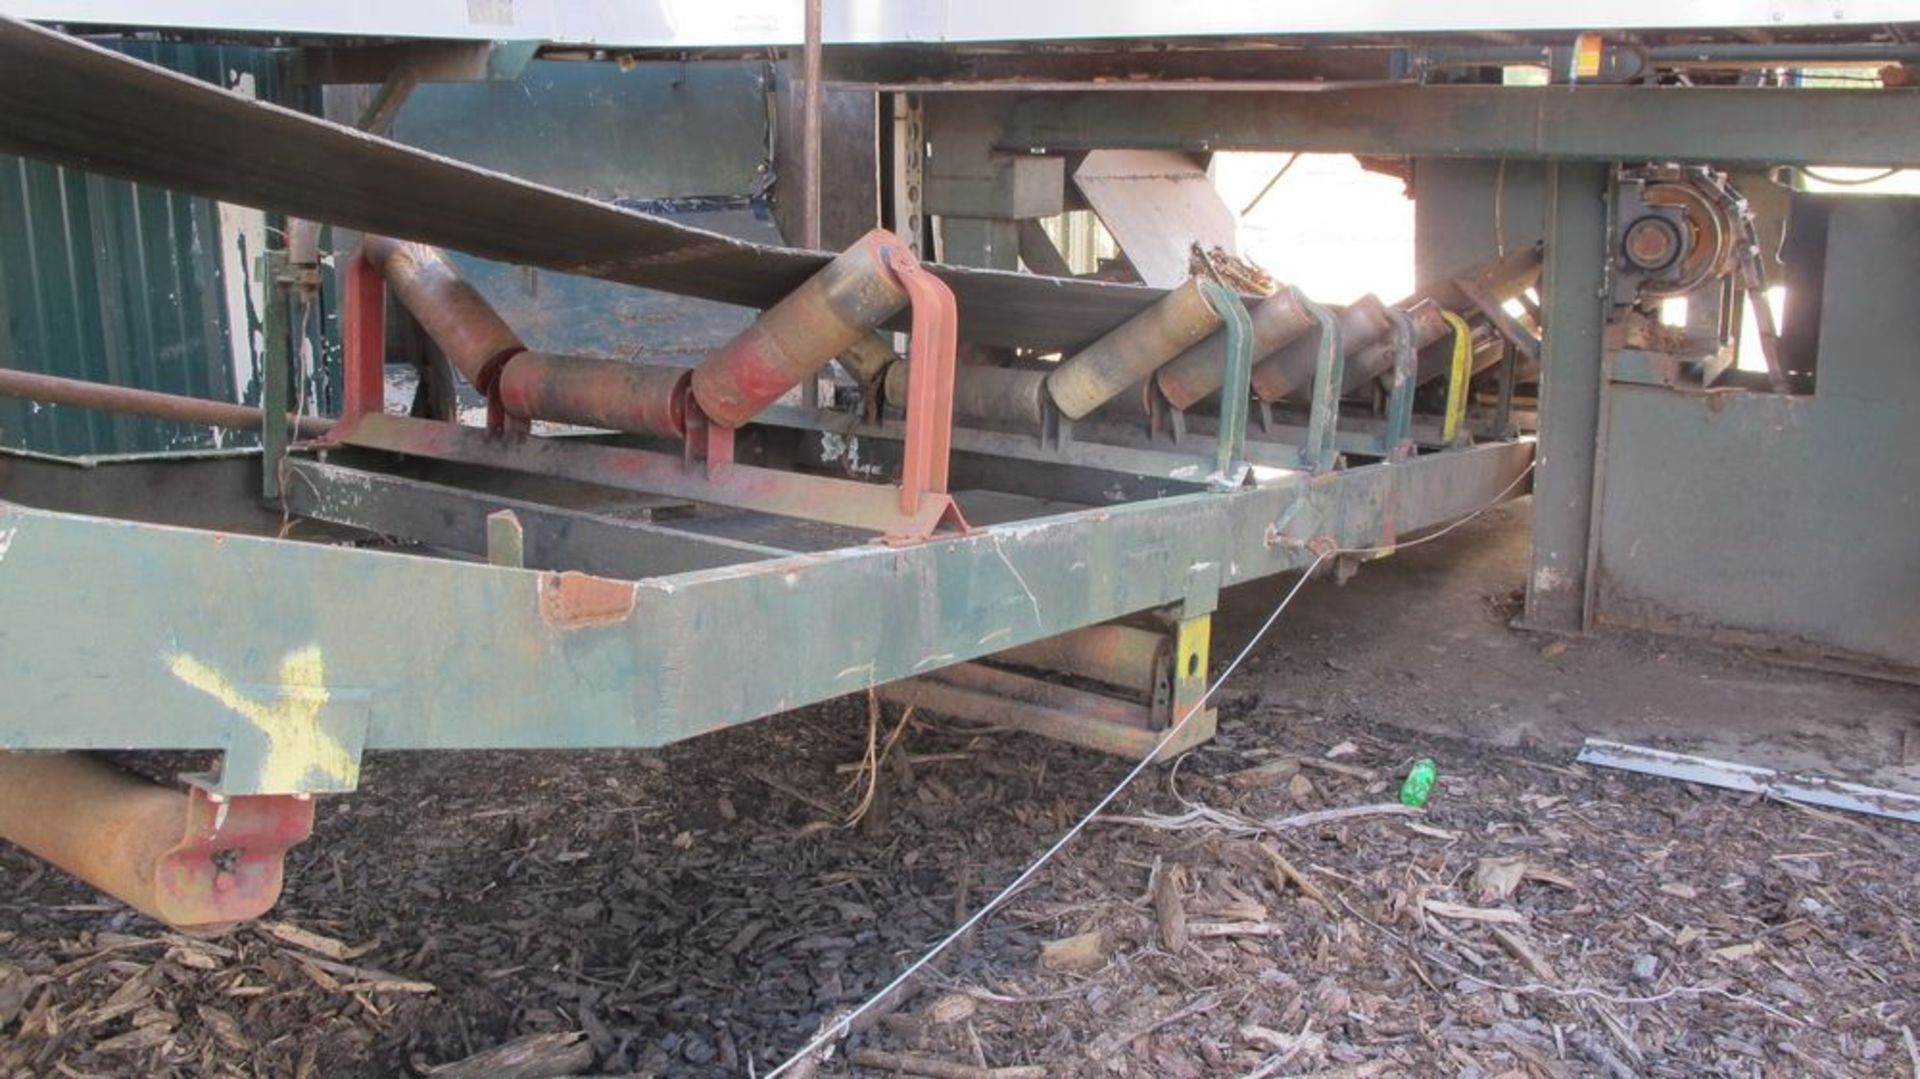 APPROX 53'L INCLINE TROUGH RUBBER BELT (41"W) CONVEYOR W/40HP MOTOR/DRIVE AND ELECTRICAL CALES/ - Image 3 of 7